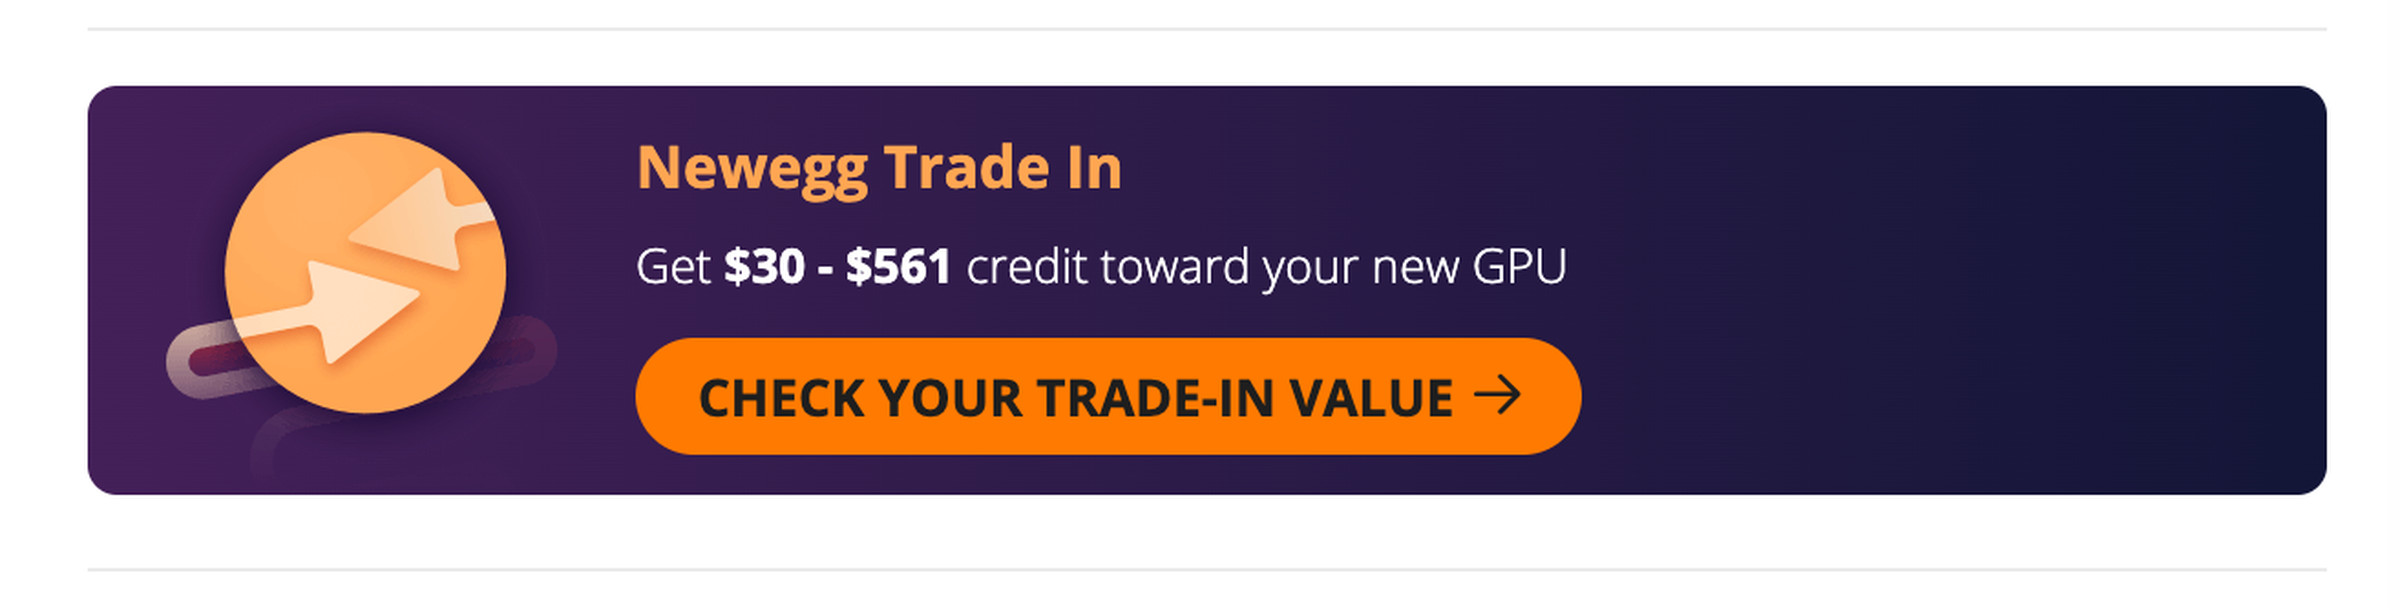 Screenshot of a banner from Newegg’s website reading “Newegg Trade In. Get $30 - $561 credit toward your new GPU. Check your trade-in value” 